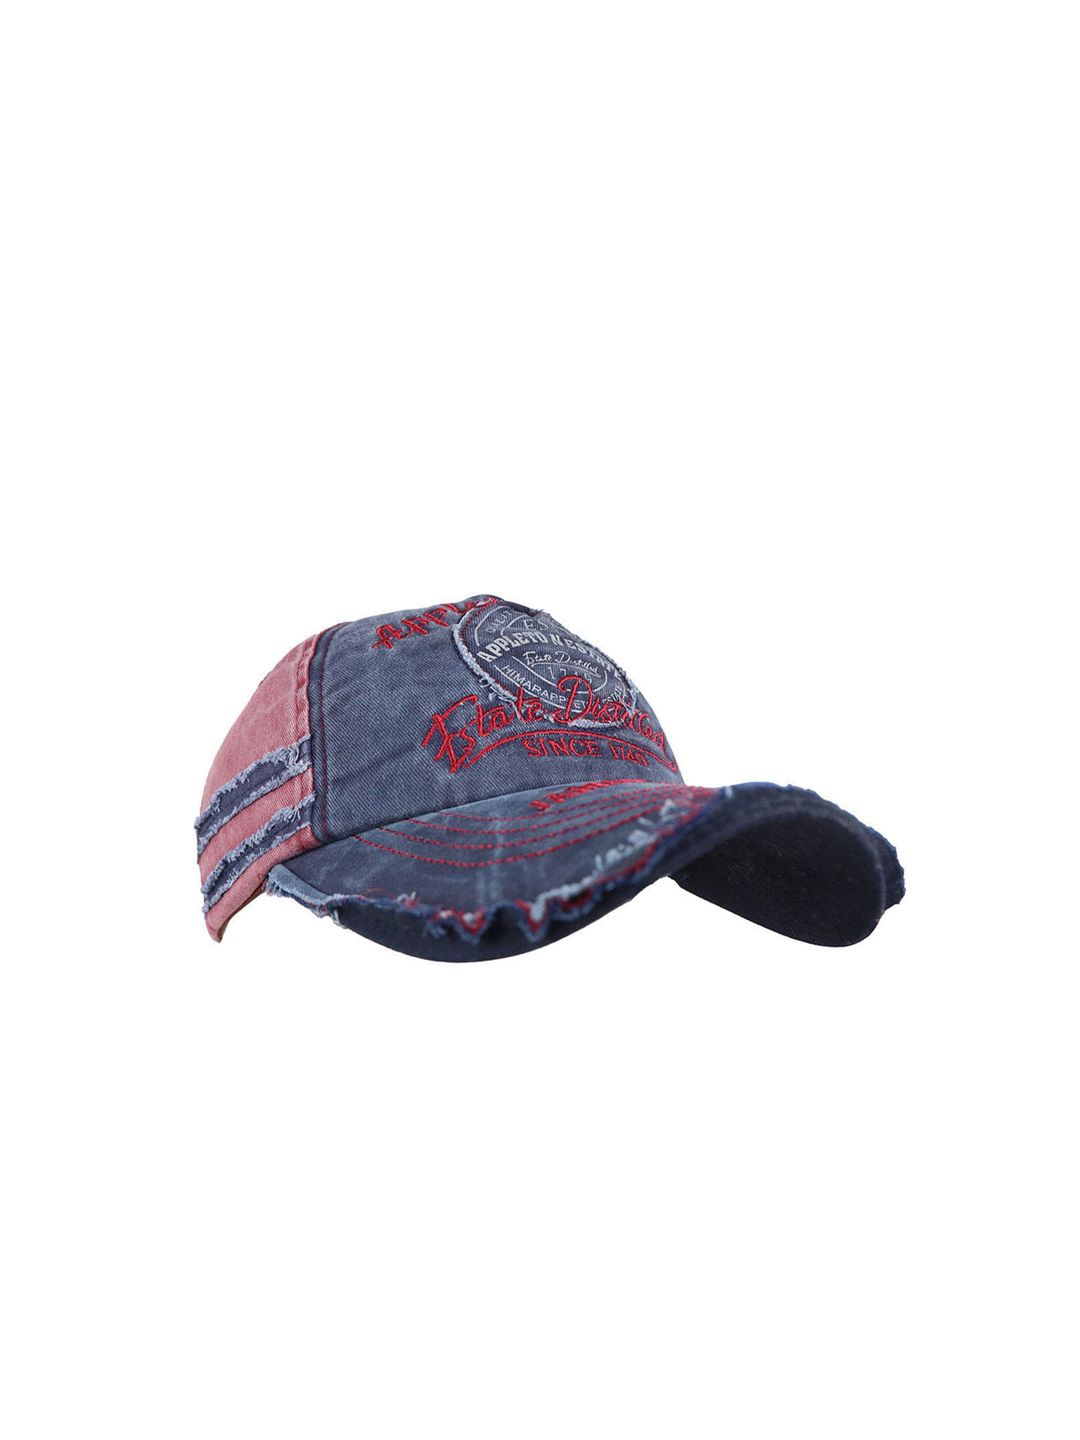 iSWEVEN Unisex Blue & Pink Embroidered Adjustable Snapback Cap Price in India